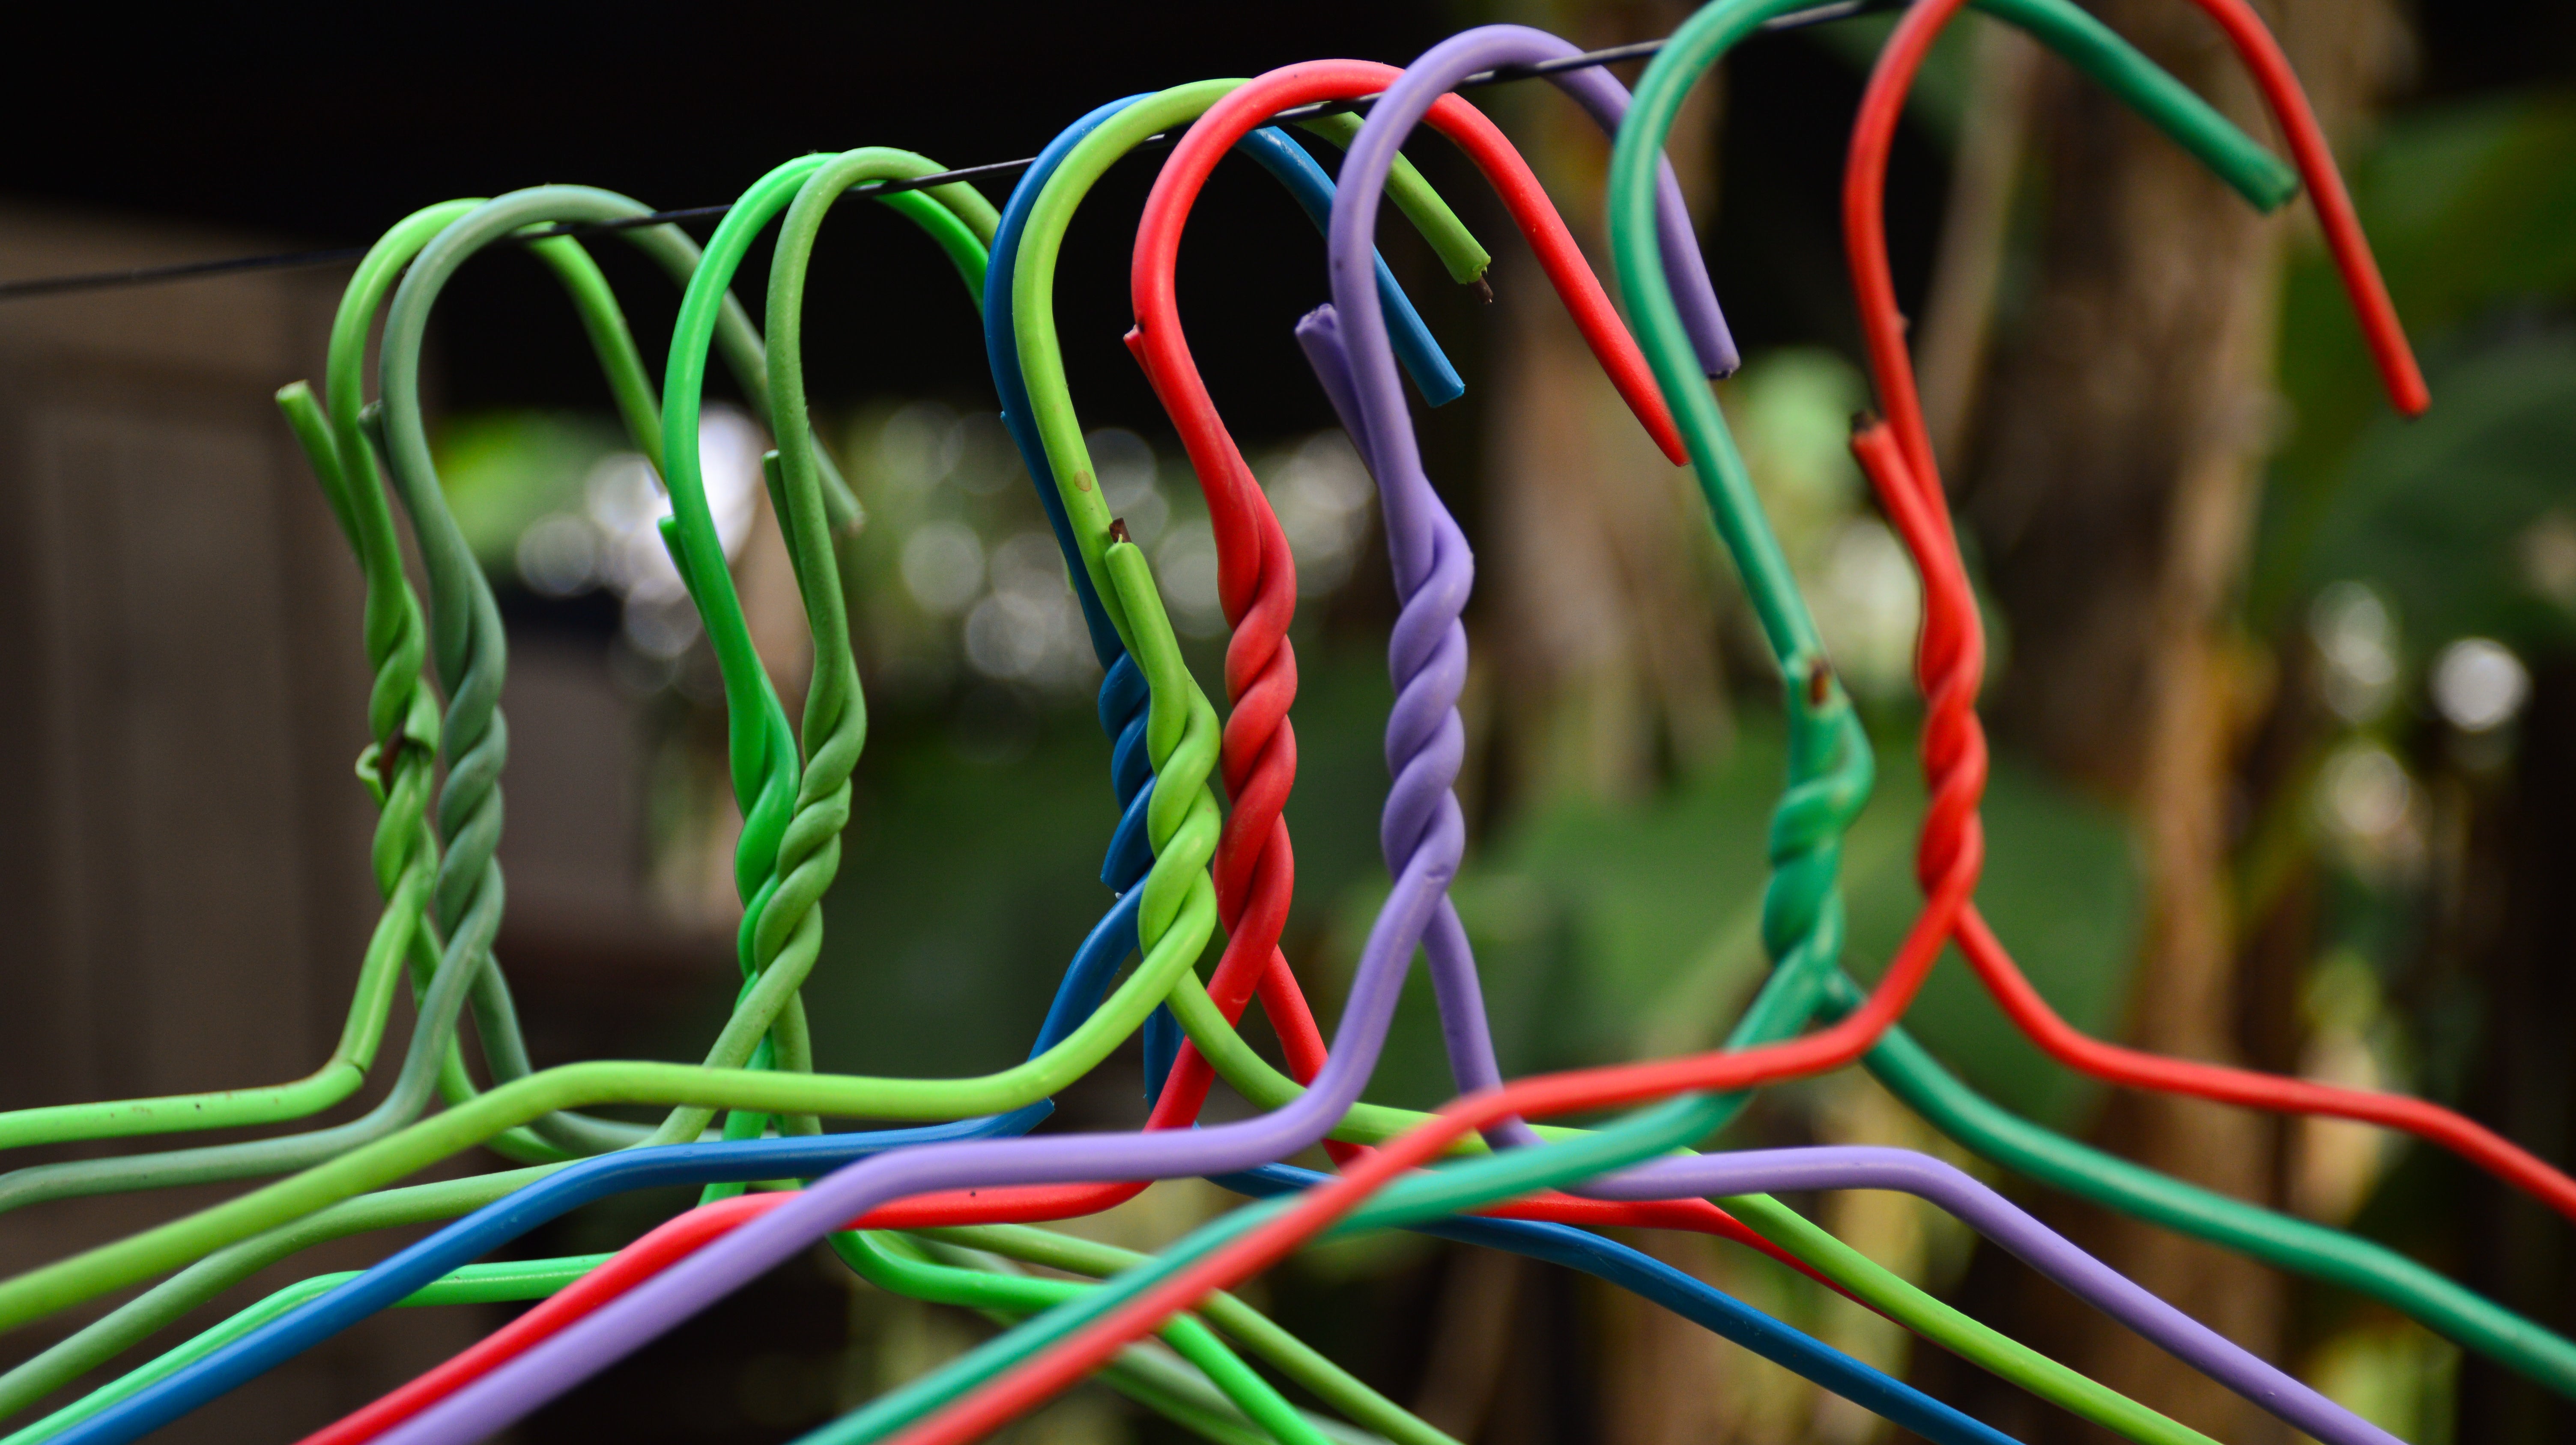 Can You Recycle Those Annoying Wire Hangers?